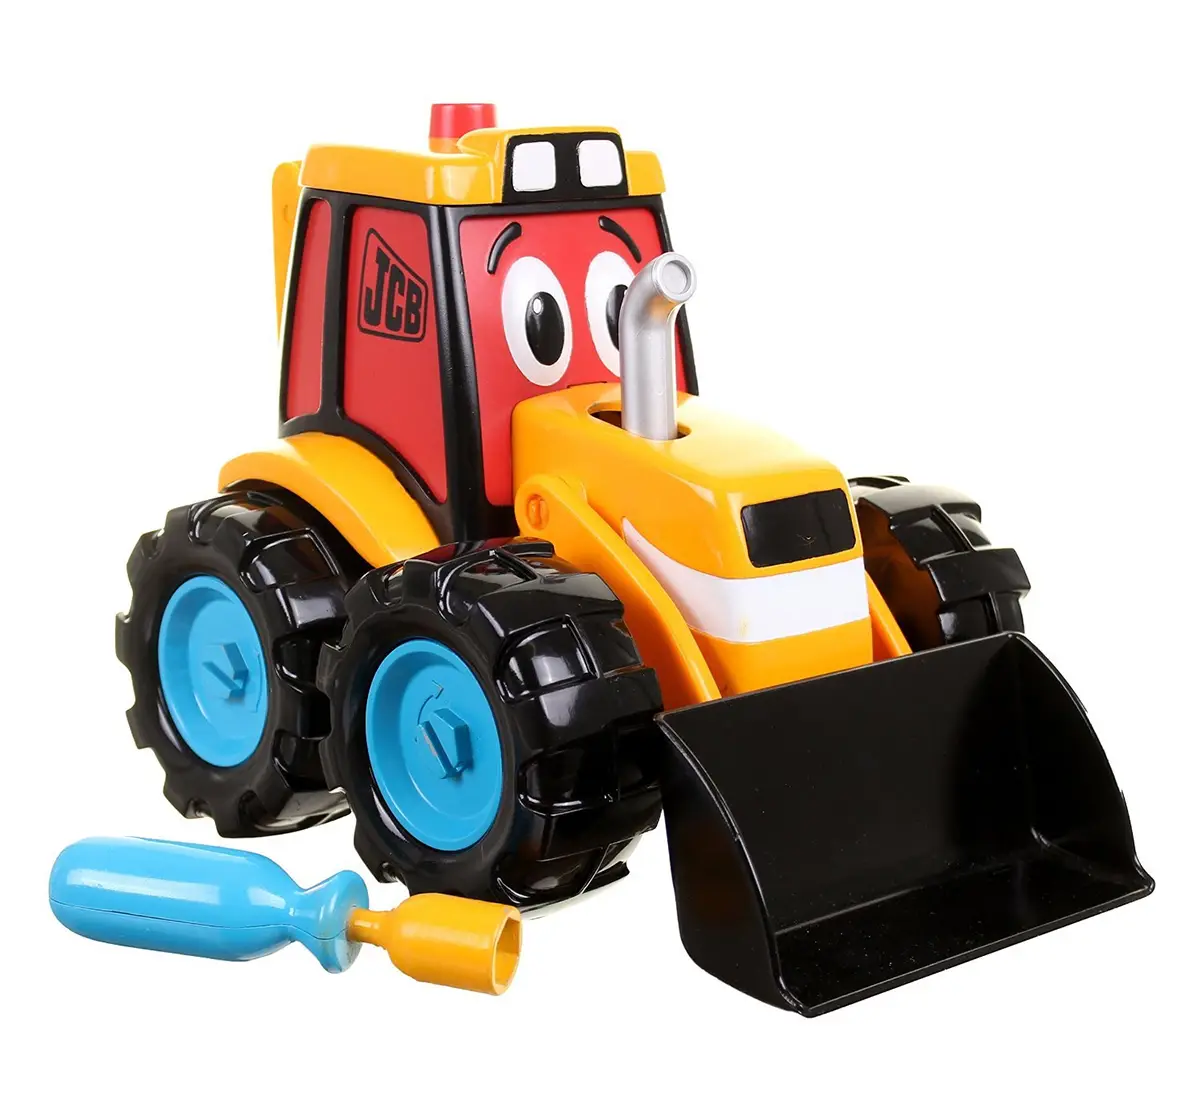 JCB My first Build and Go Digger Construction Toys for kids 12M+, Multicolour